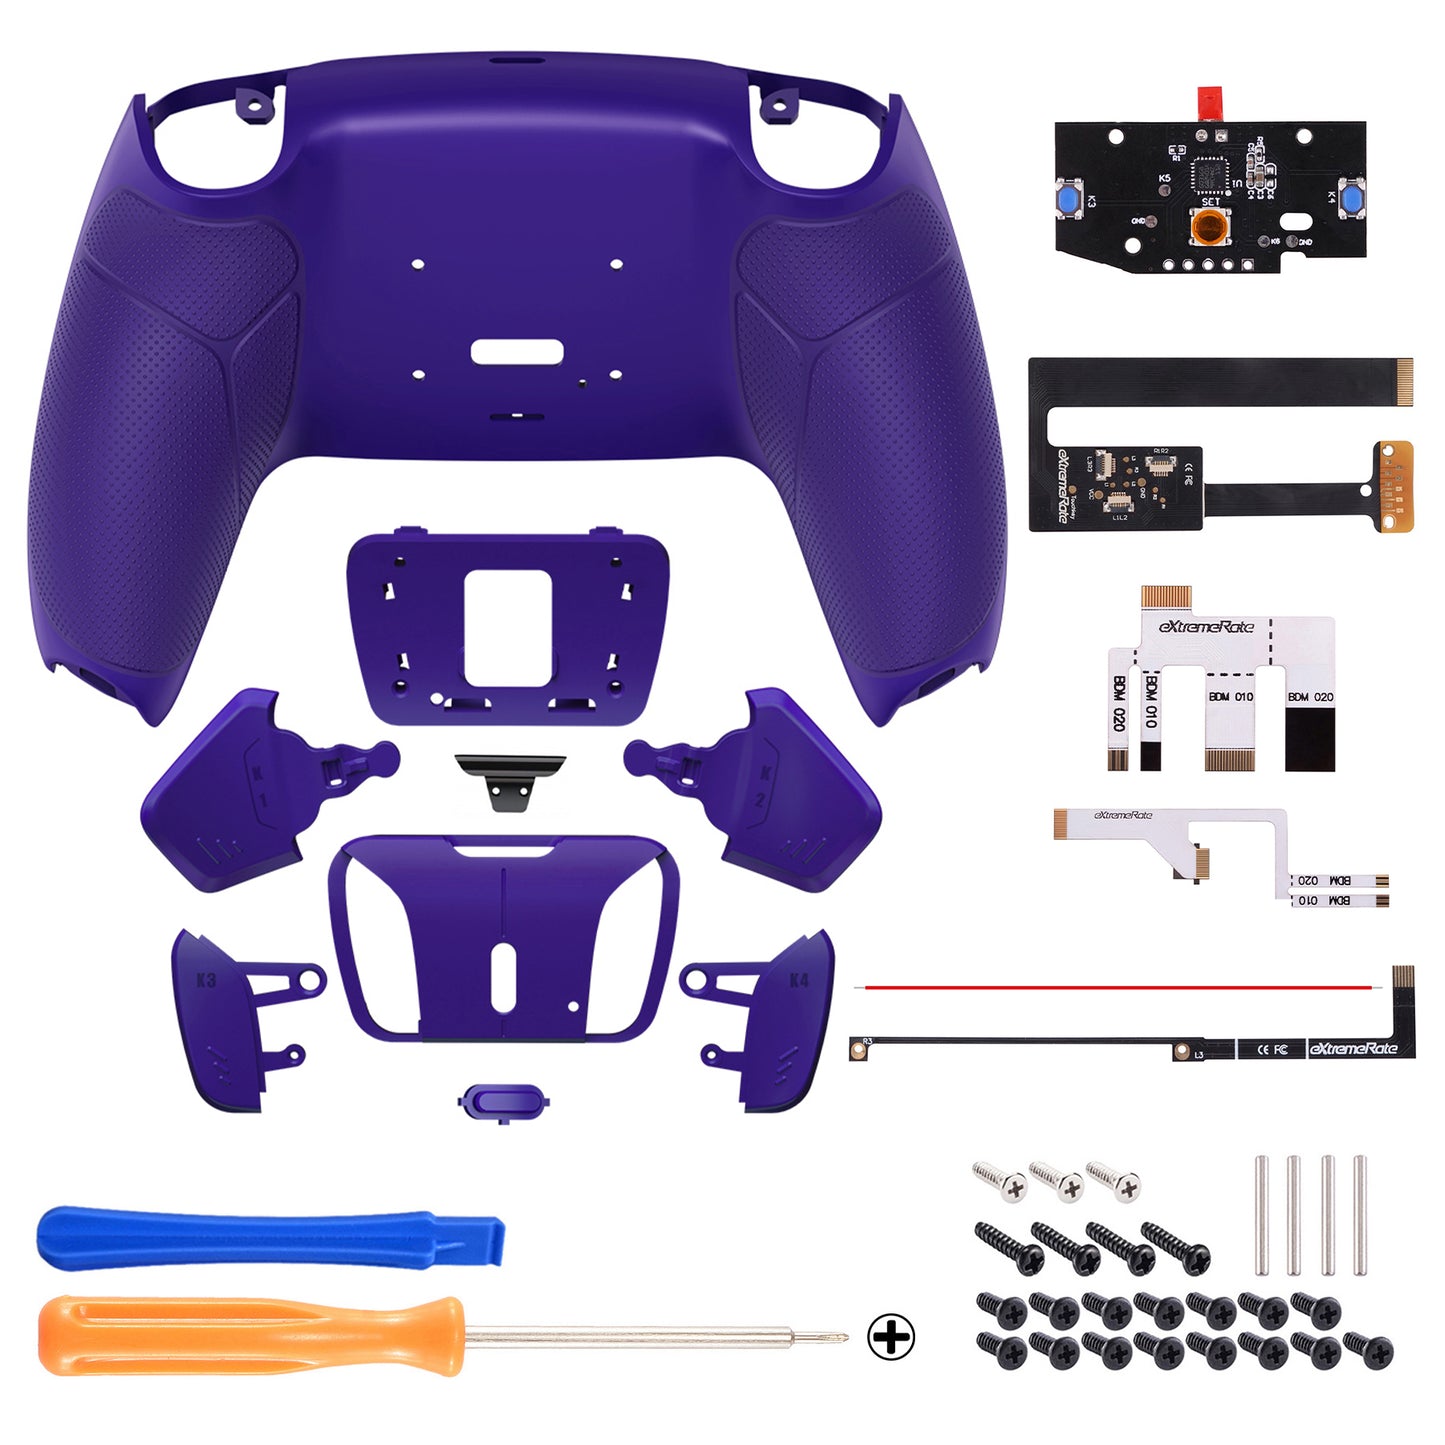 eXtremeRate Remappable RISE 4.0 Remap Kit for PS5 Controller BDM-010/020 - Rubberized Galactic Purple eXtremeRate